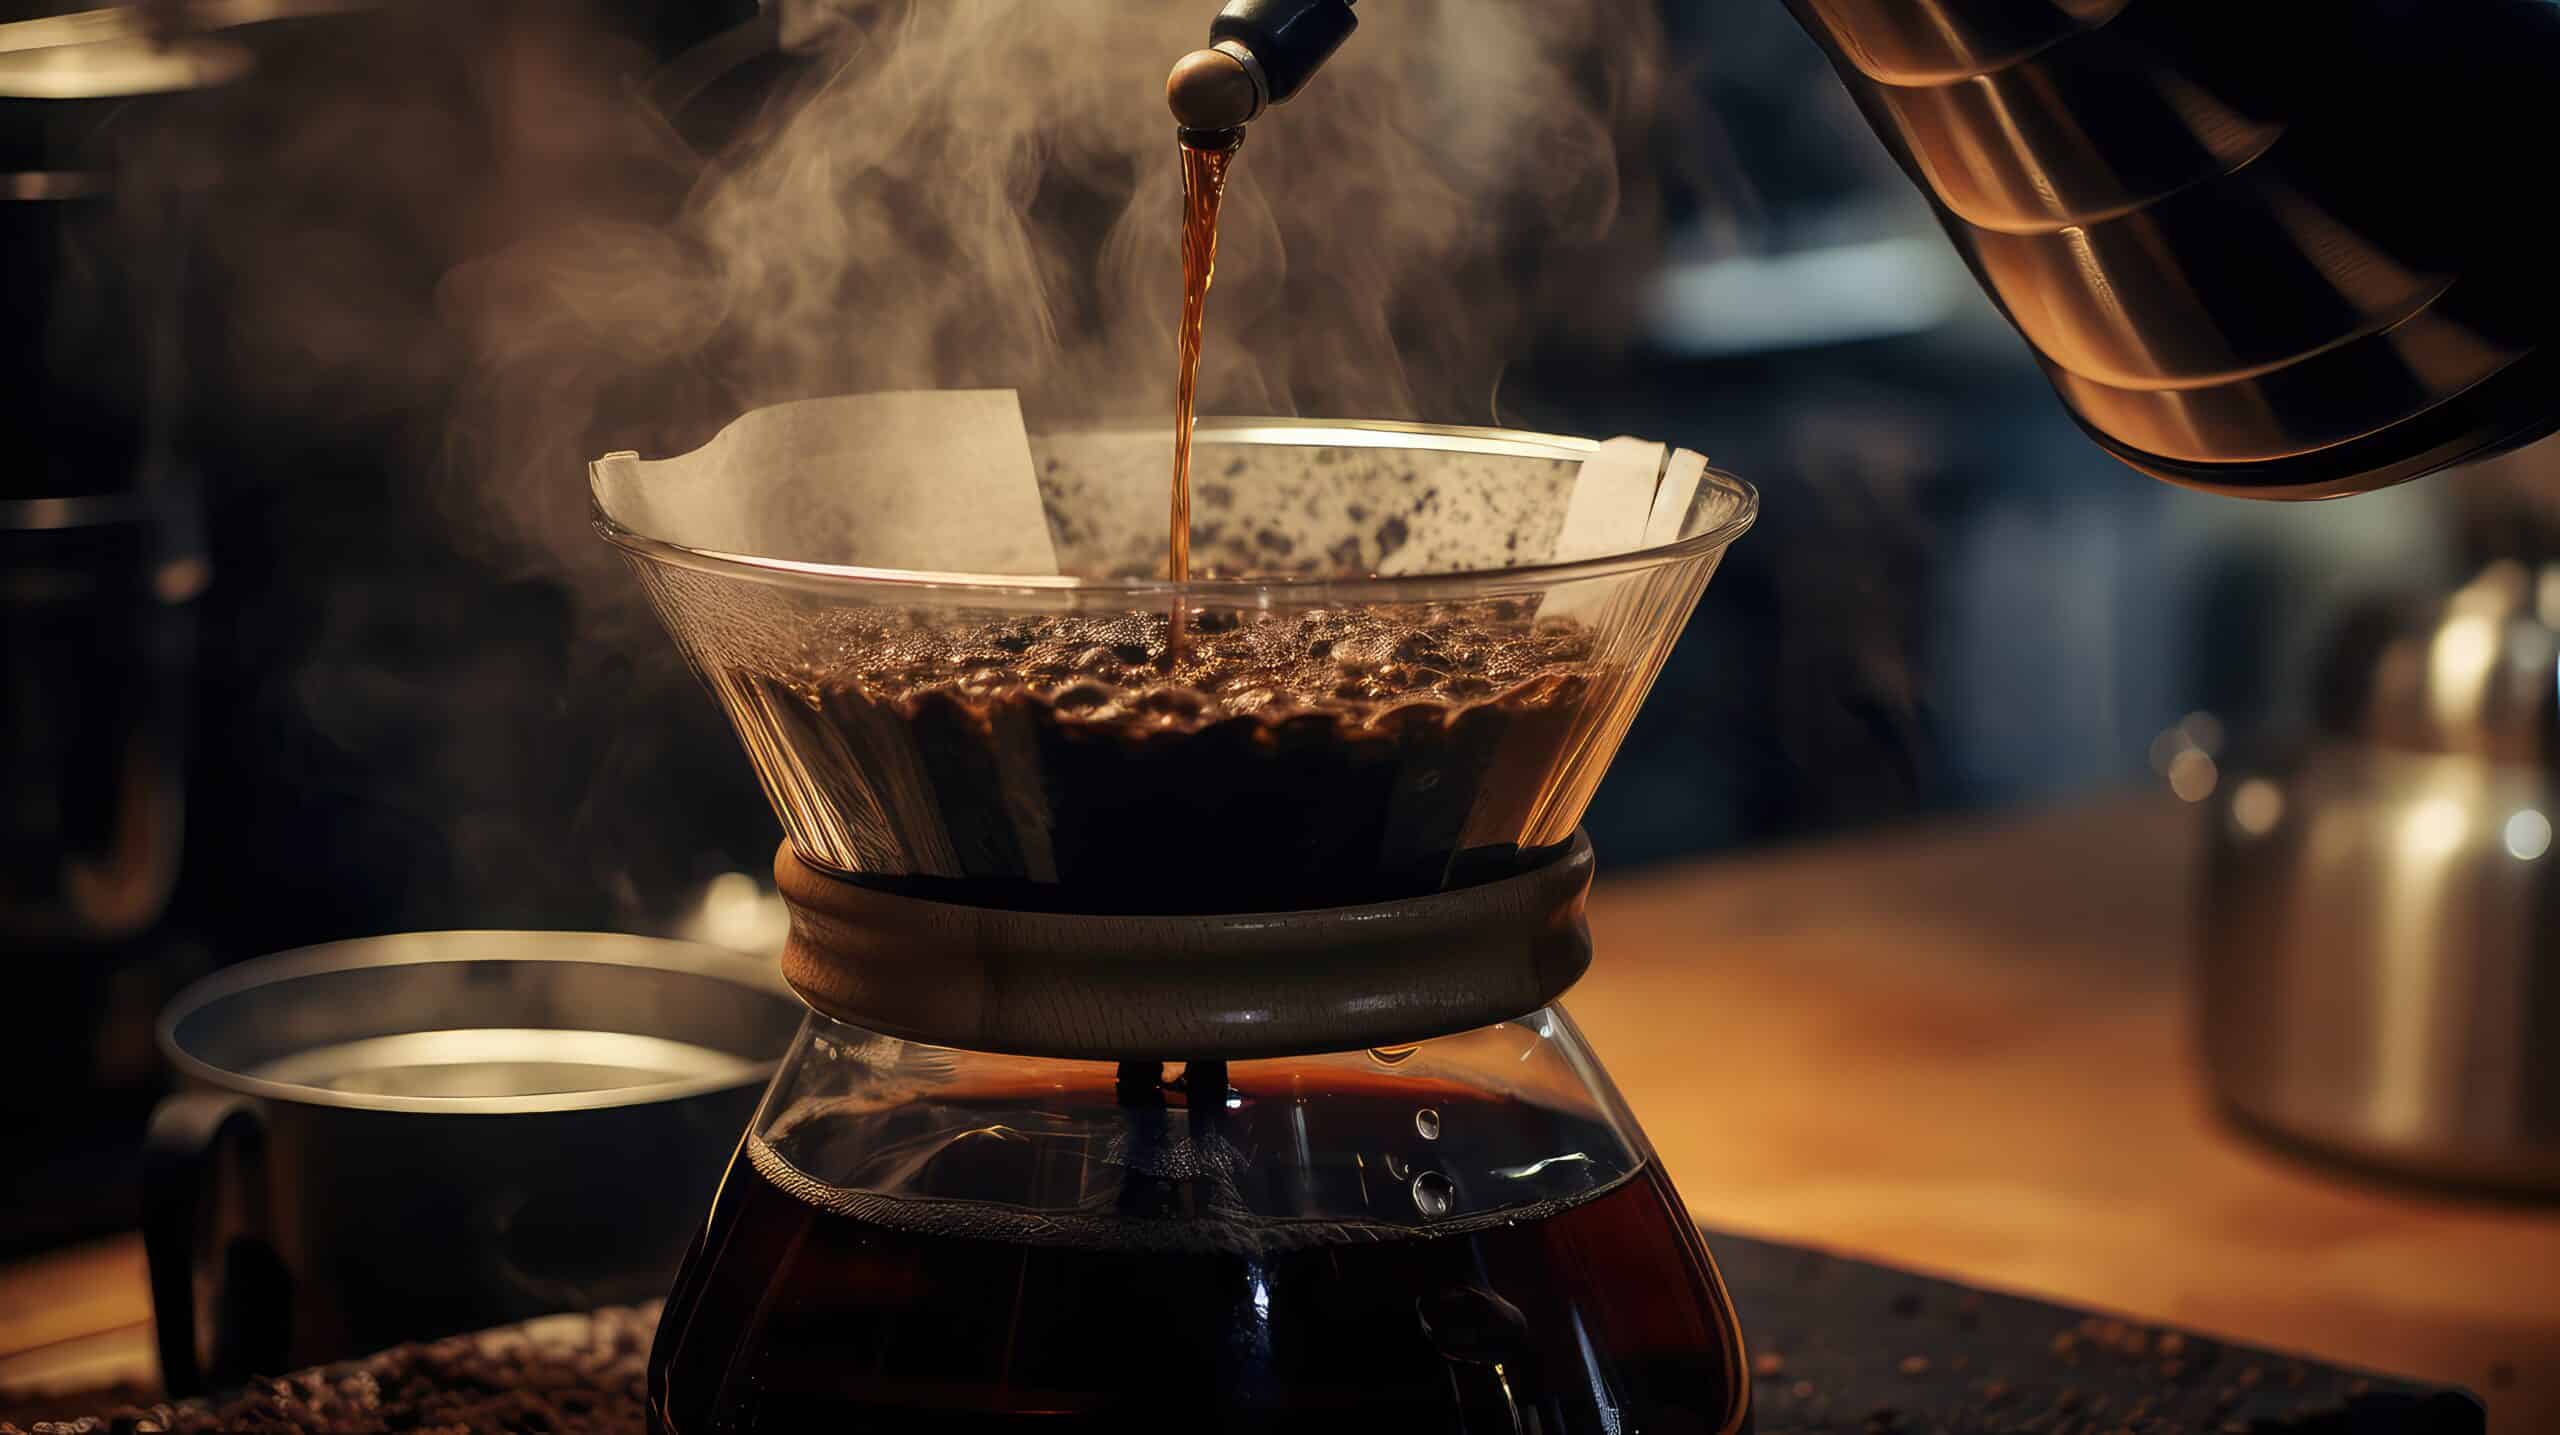 www.appr.com : How To Make Drip Coffee Stronger?